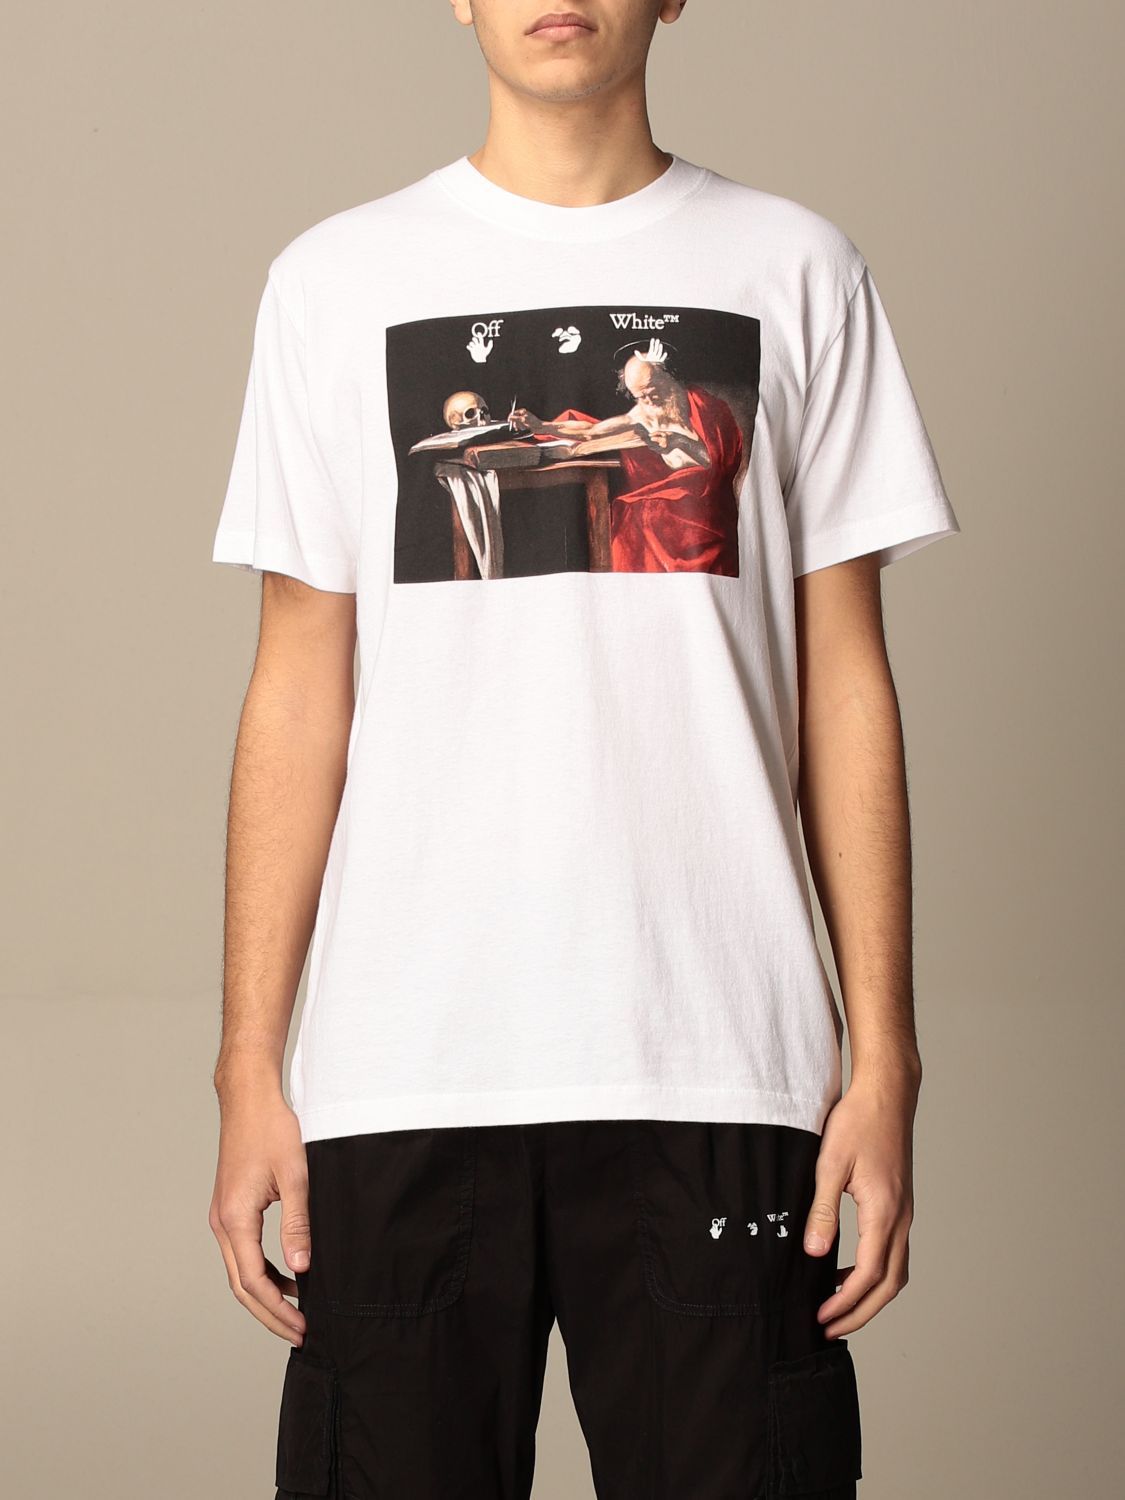 | online OFF-WHITE: t- cotton - logo White White with back t-shirt Off at Off-White OMAA027R21JER004 shirt